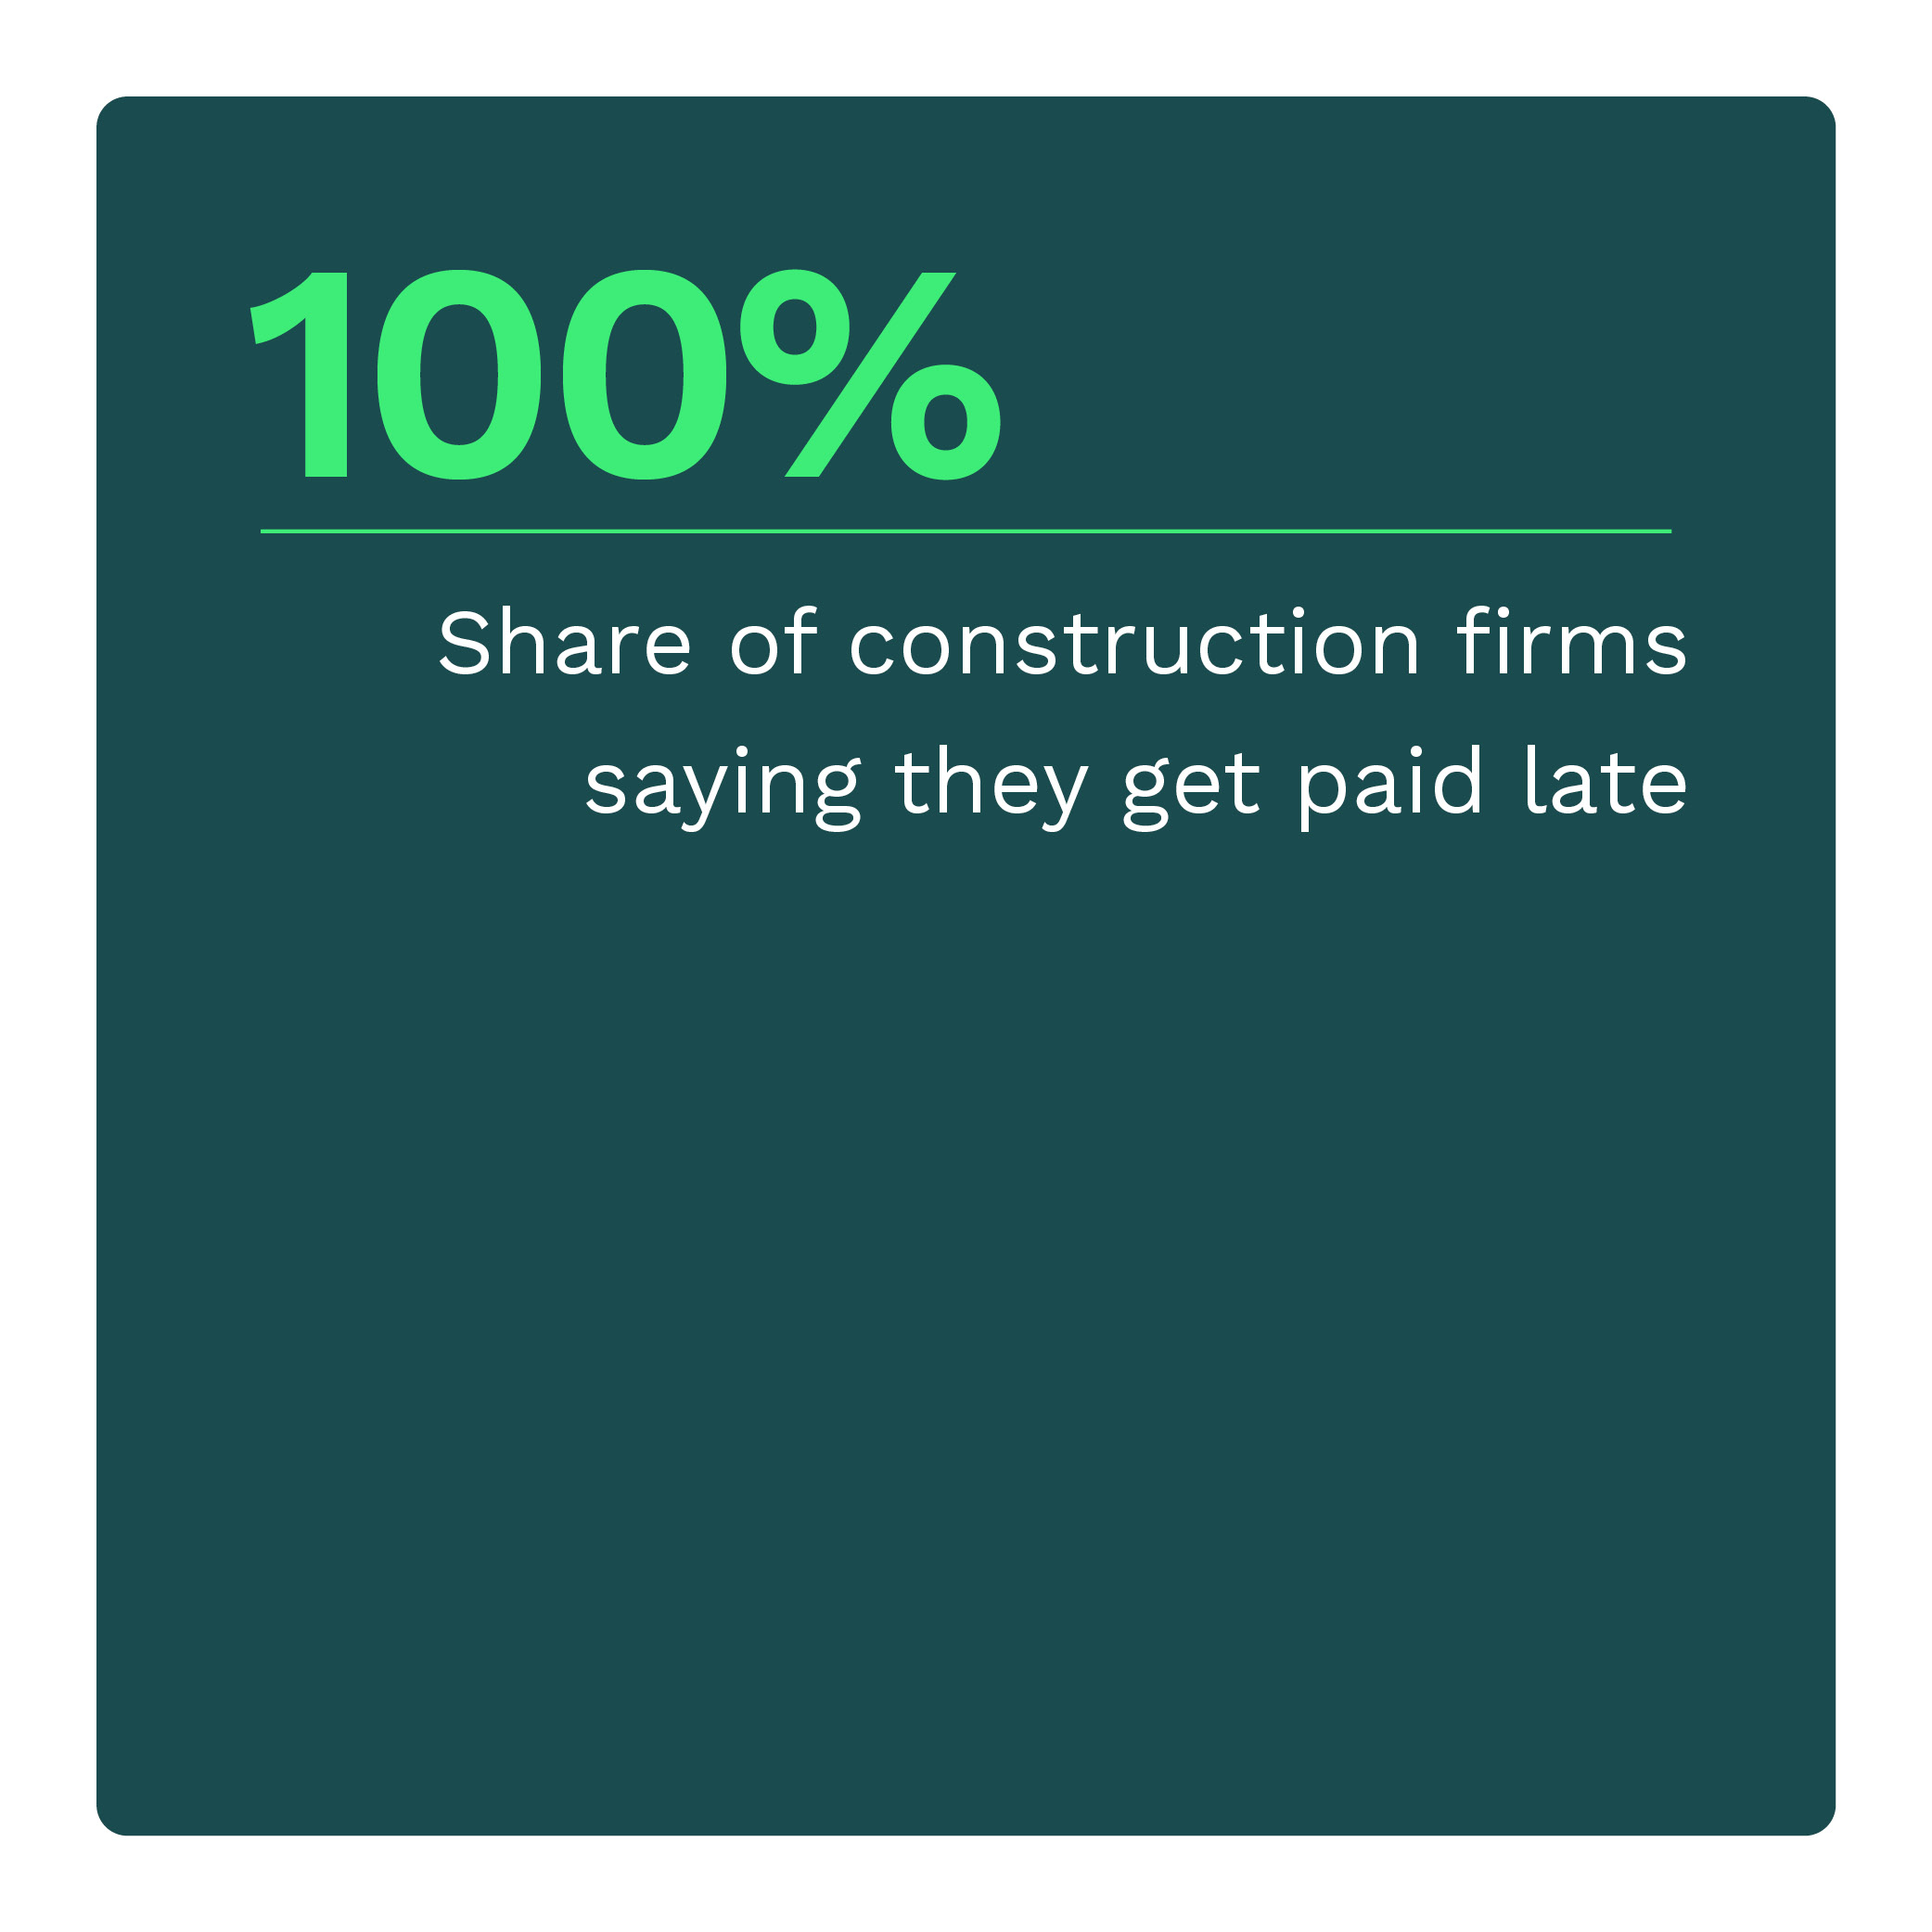 100%: Share of construction firms saying they get paid late